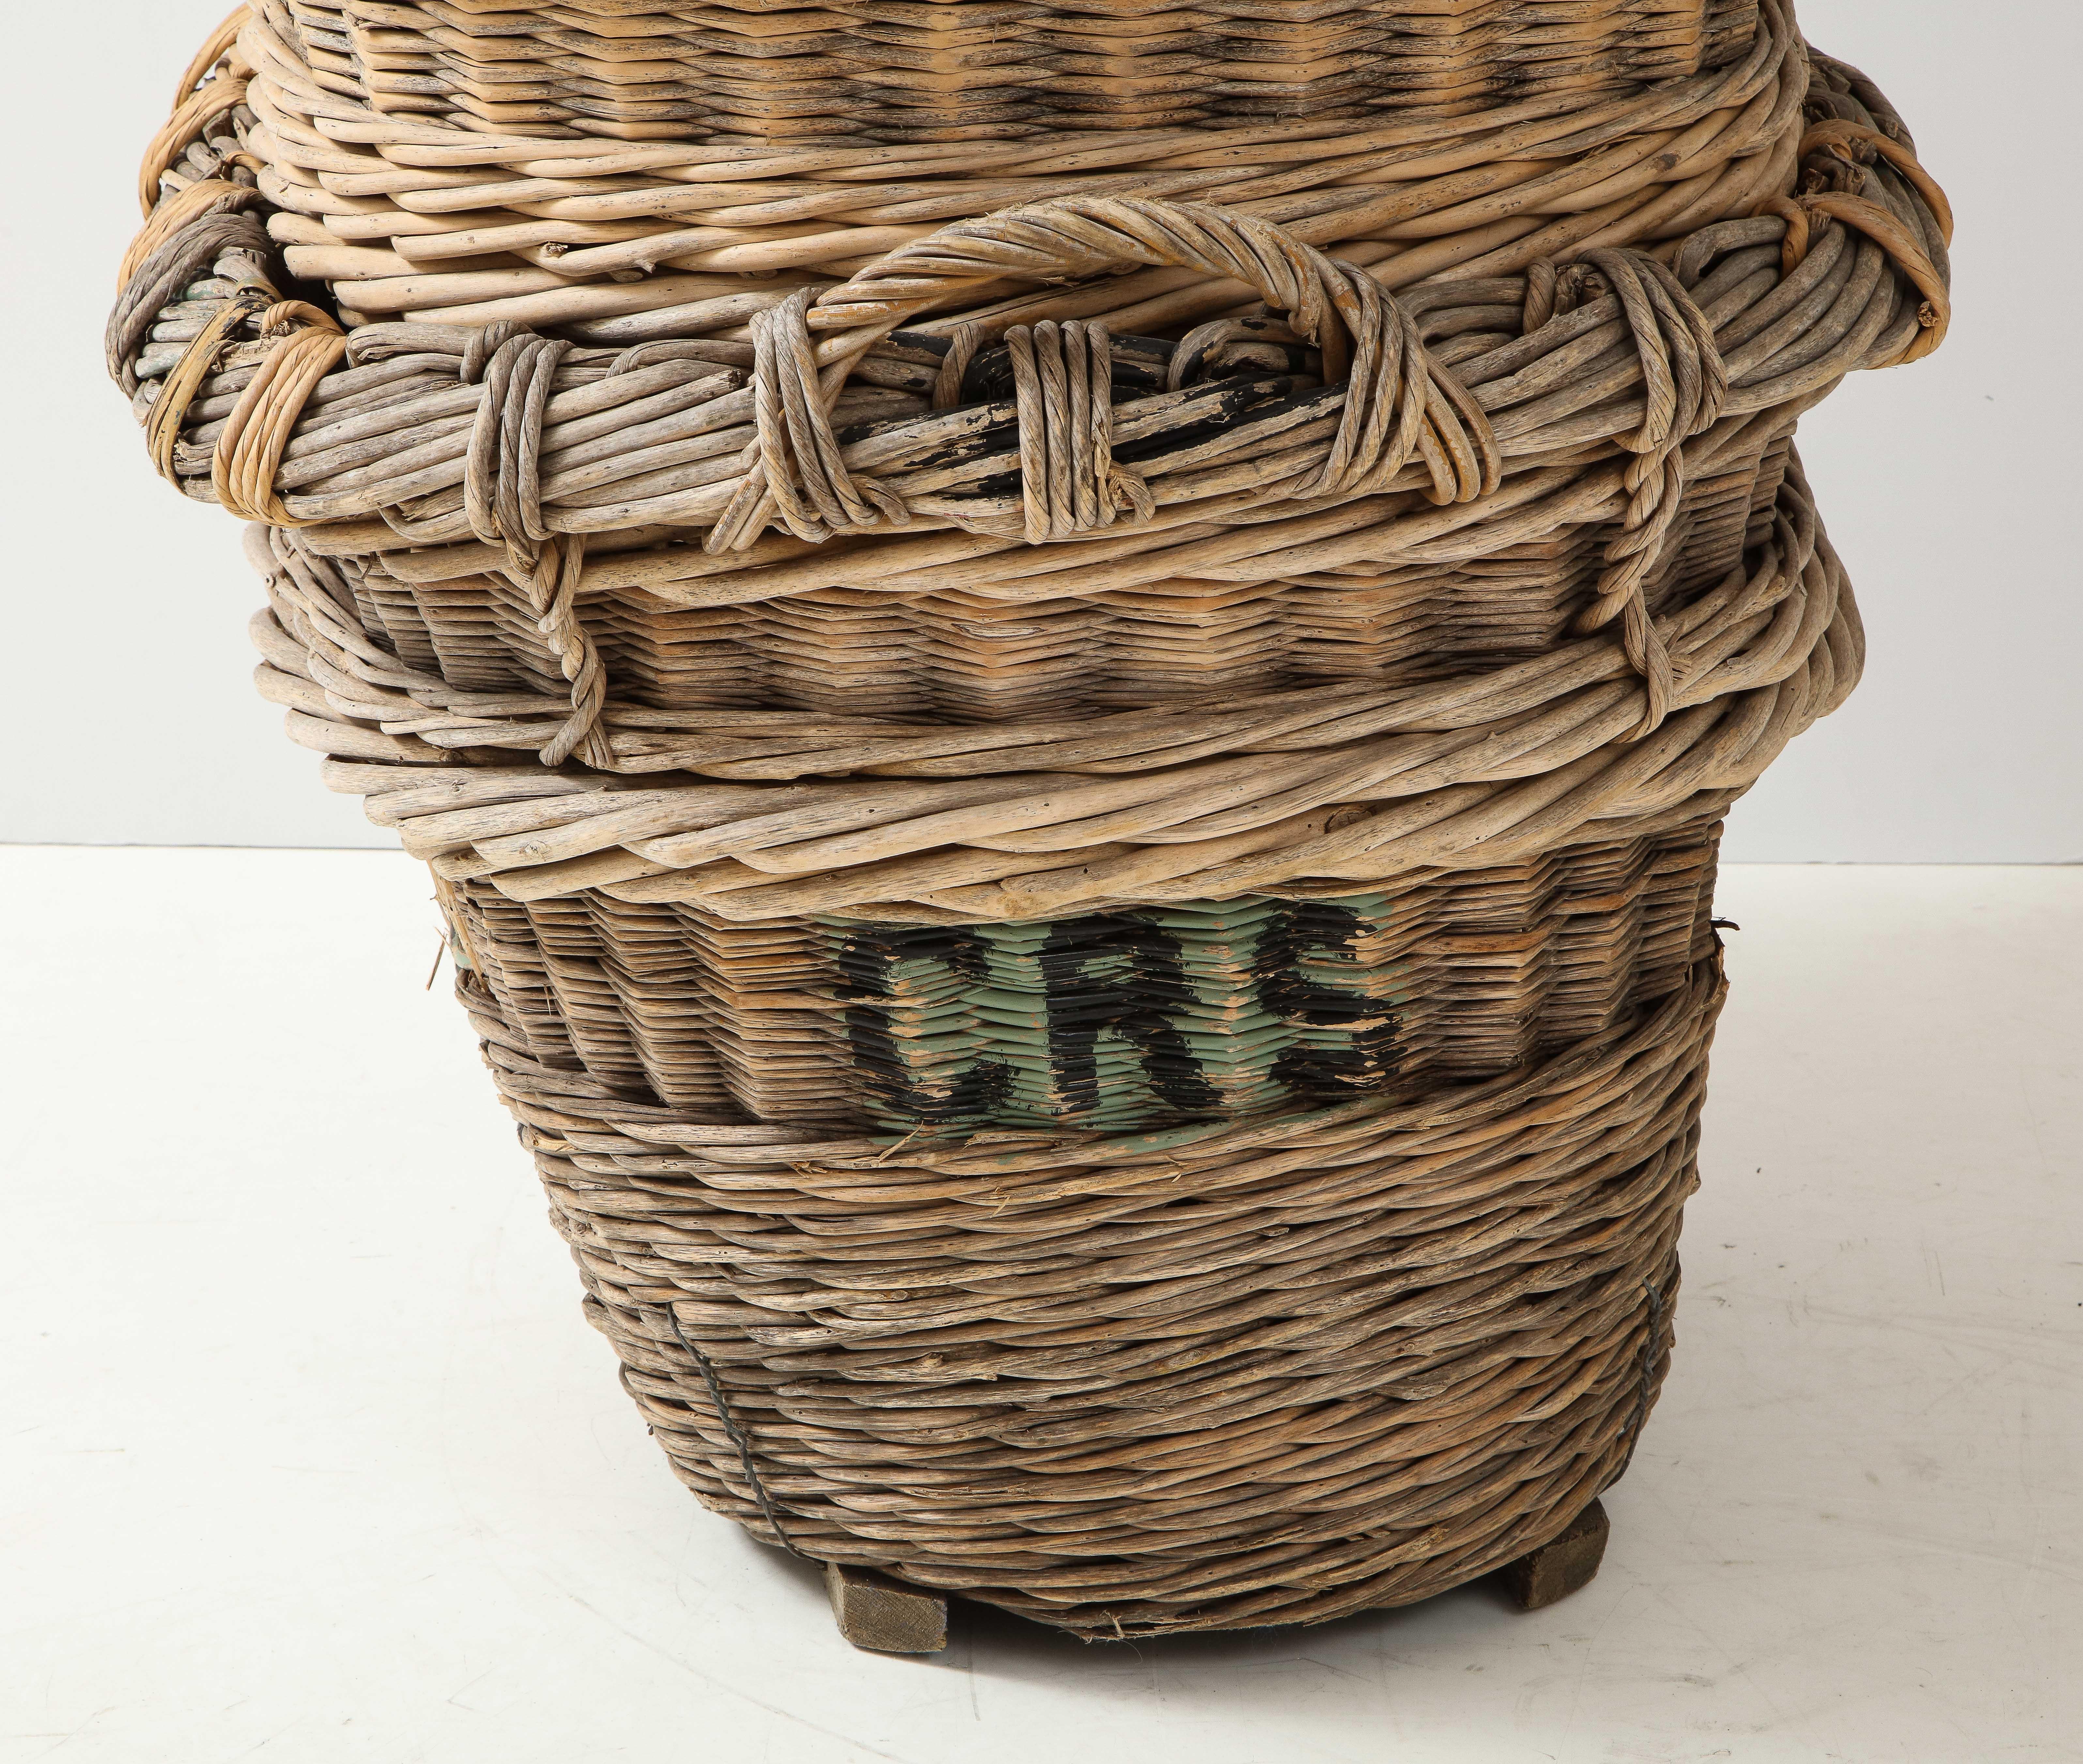 Only 2 left - sold individually

Large Champagne grape harvest baskets, Reims, France, c. 1920-30

These are great for firewood, pool towels, laundry, and just about anywhere you need a beautiful generous collect-all to hide mess. Perfect for